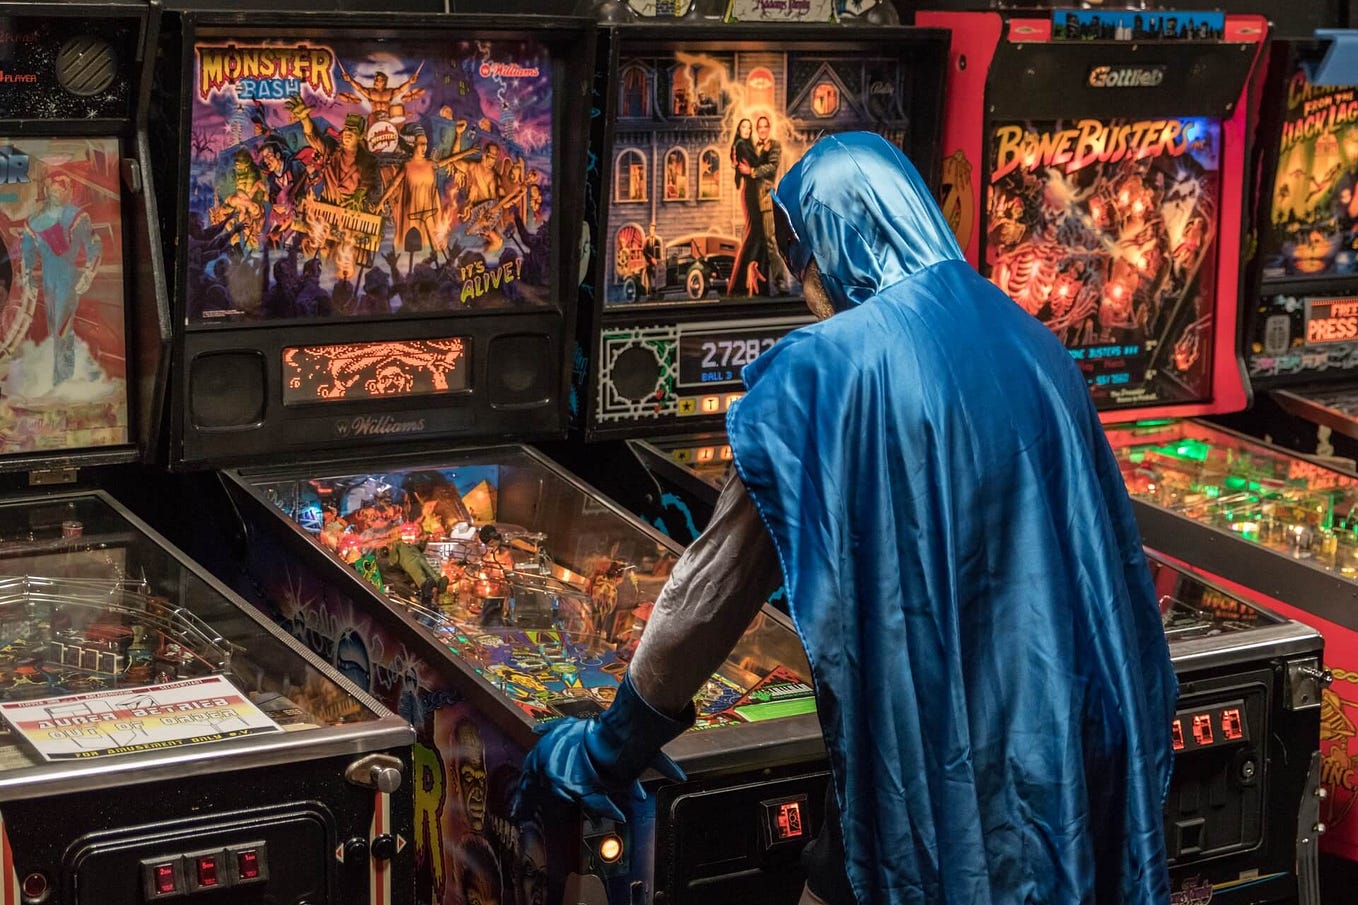 Fanboy Philosophy; Life is like a game of Pinball